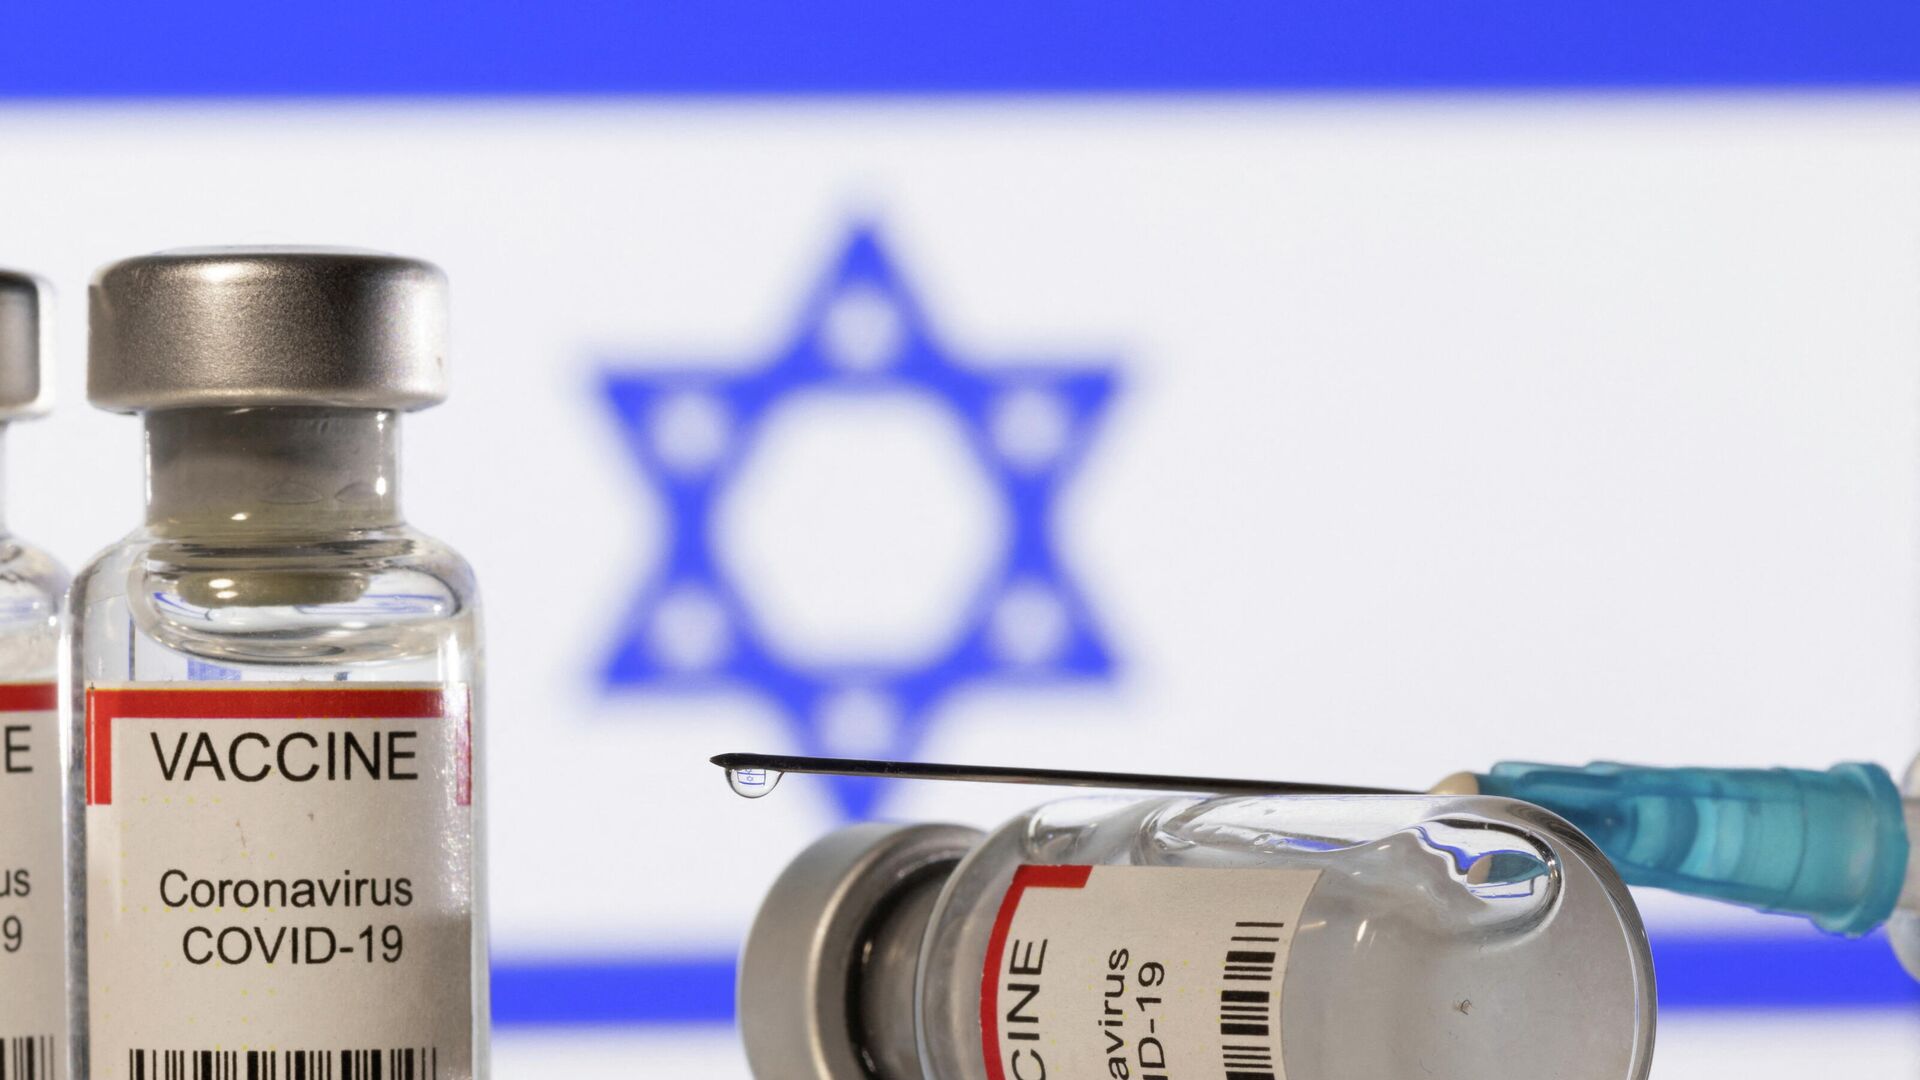 Vials labelled VACCINE Coronavirus COVID-19 and a syringe are seen in front of a displayed flag of Israel in this illustration taken December 11, 2021. - Sputnik International, 1920, 03.01.2022